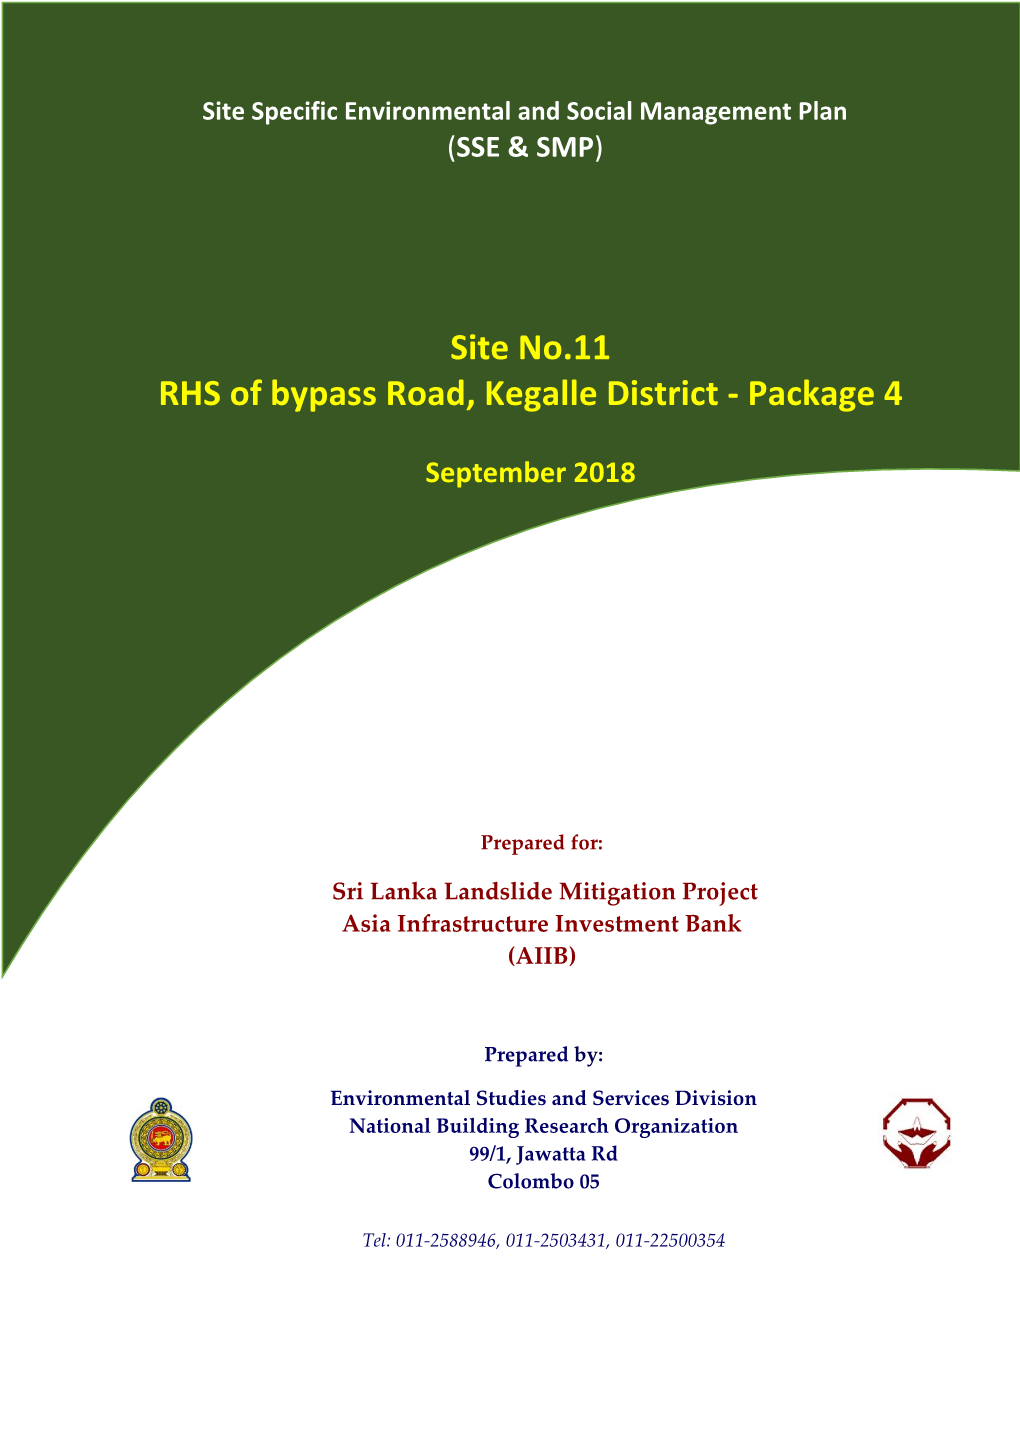 Site No.11 RHS of Bypass Road, Kegalle District